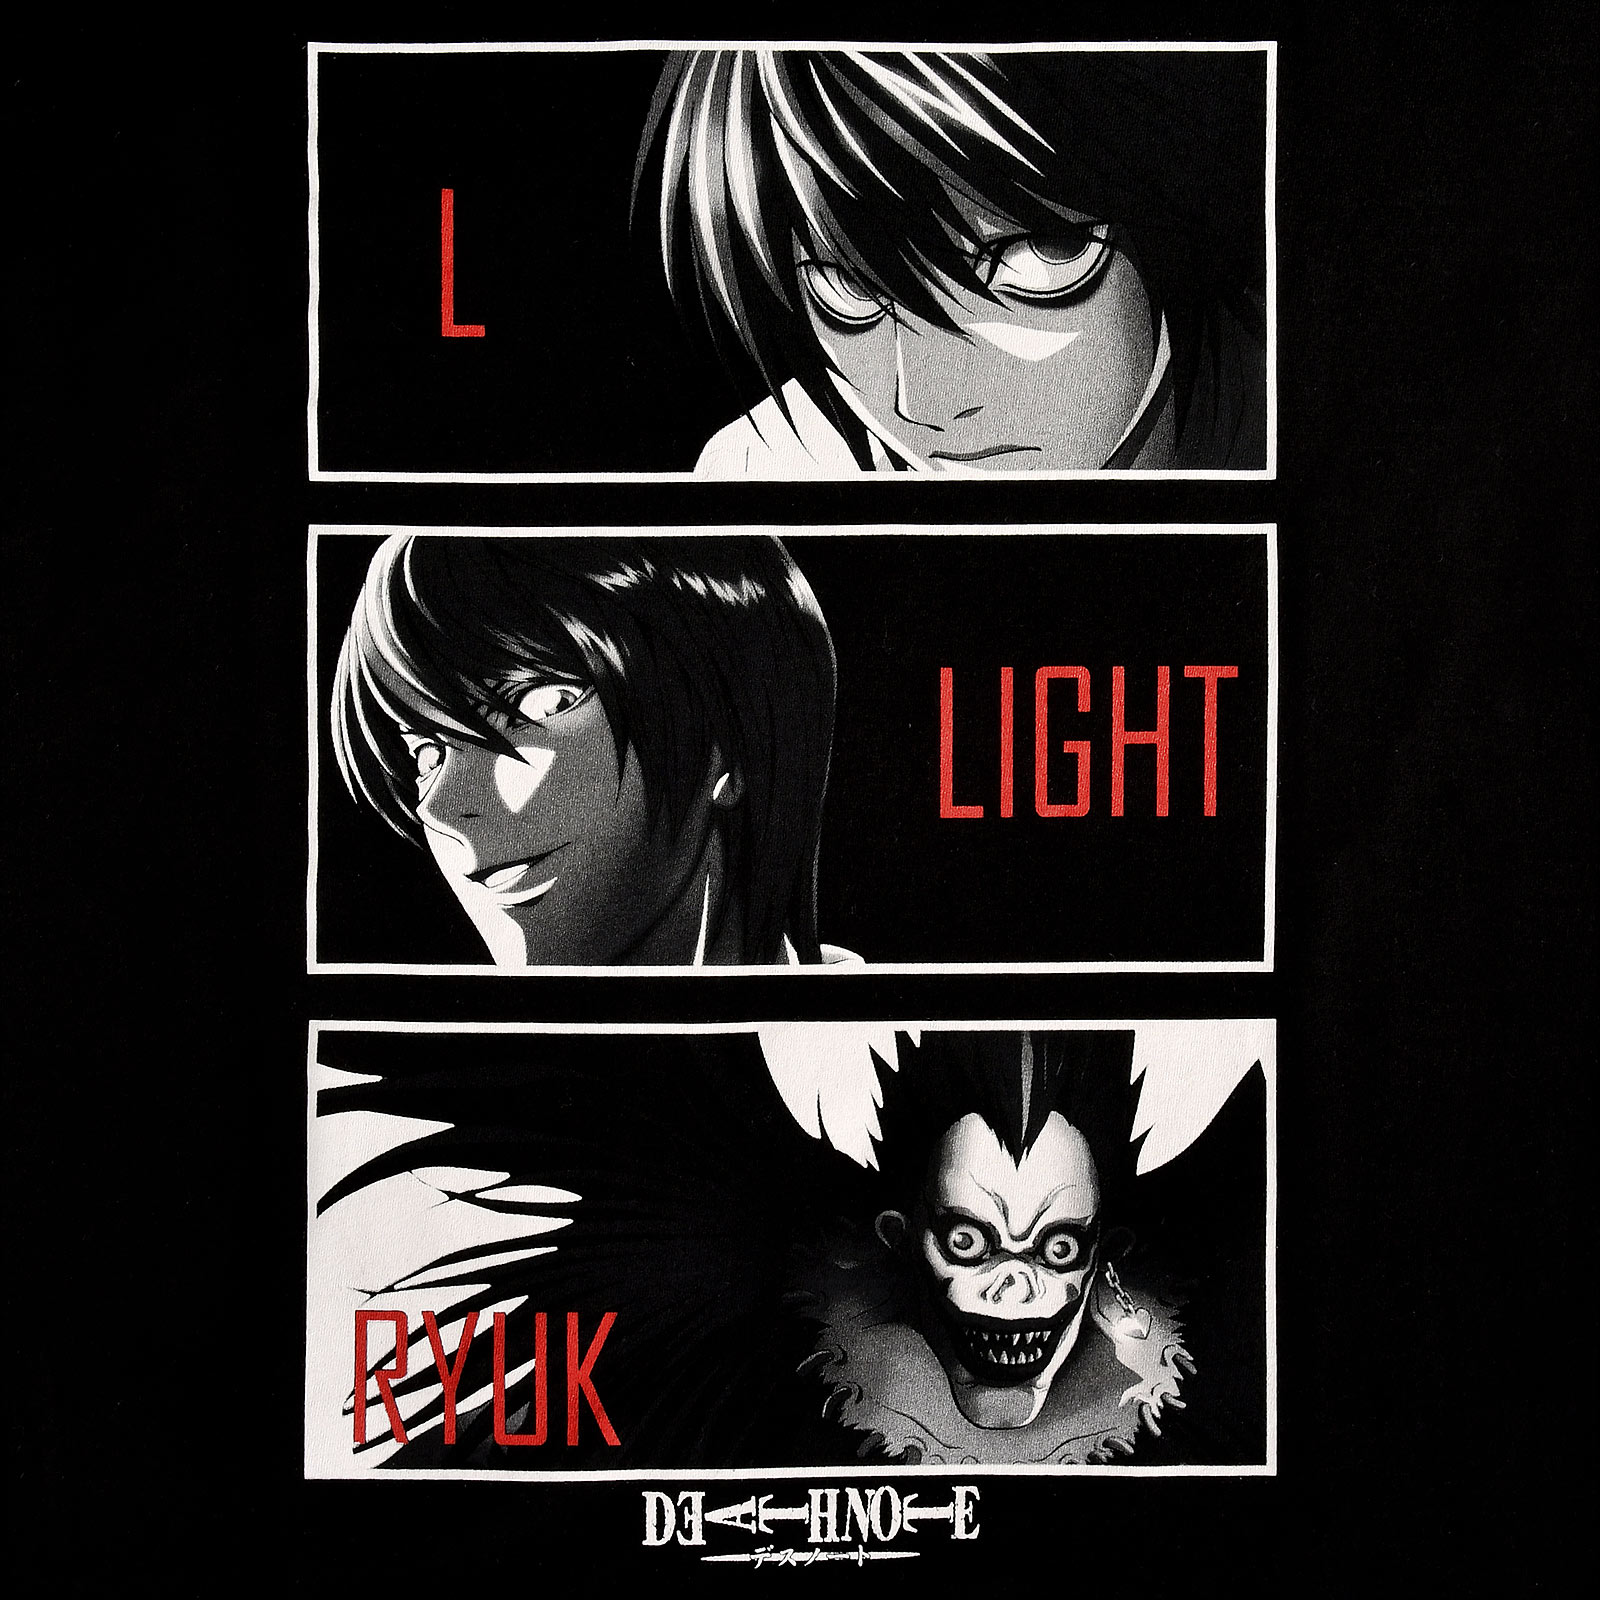 Death Note - Characters T-Shirt black